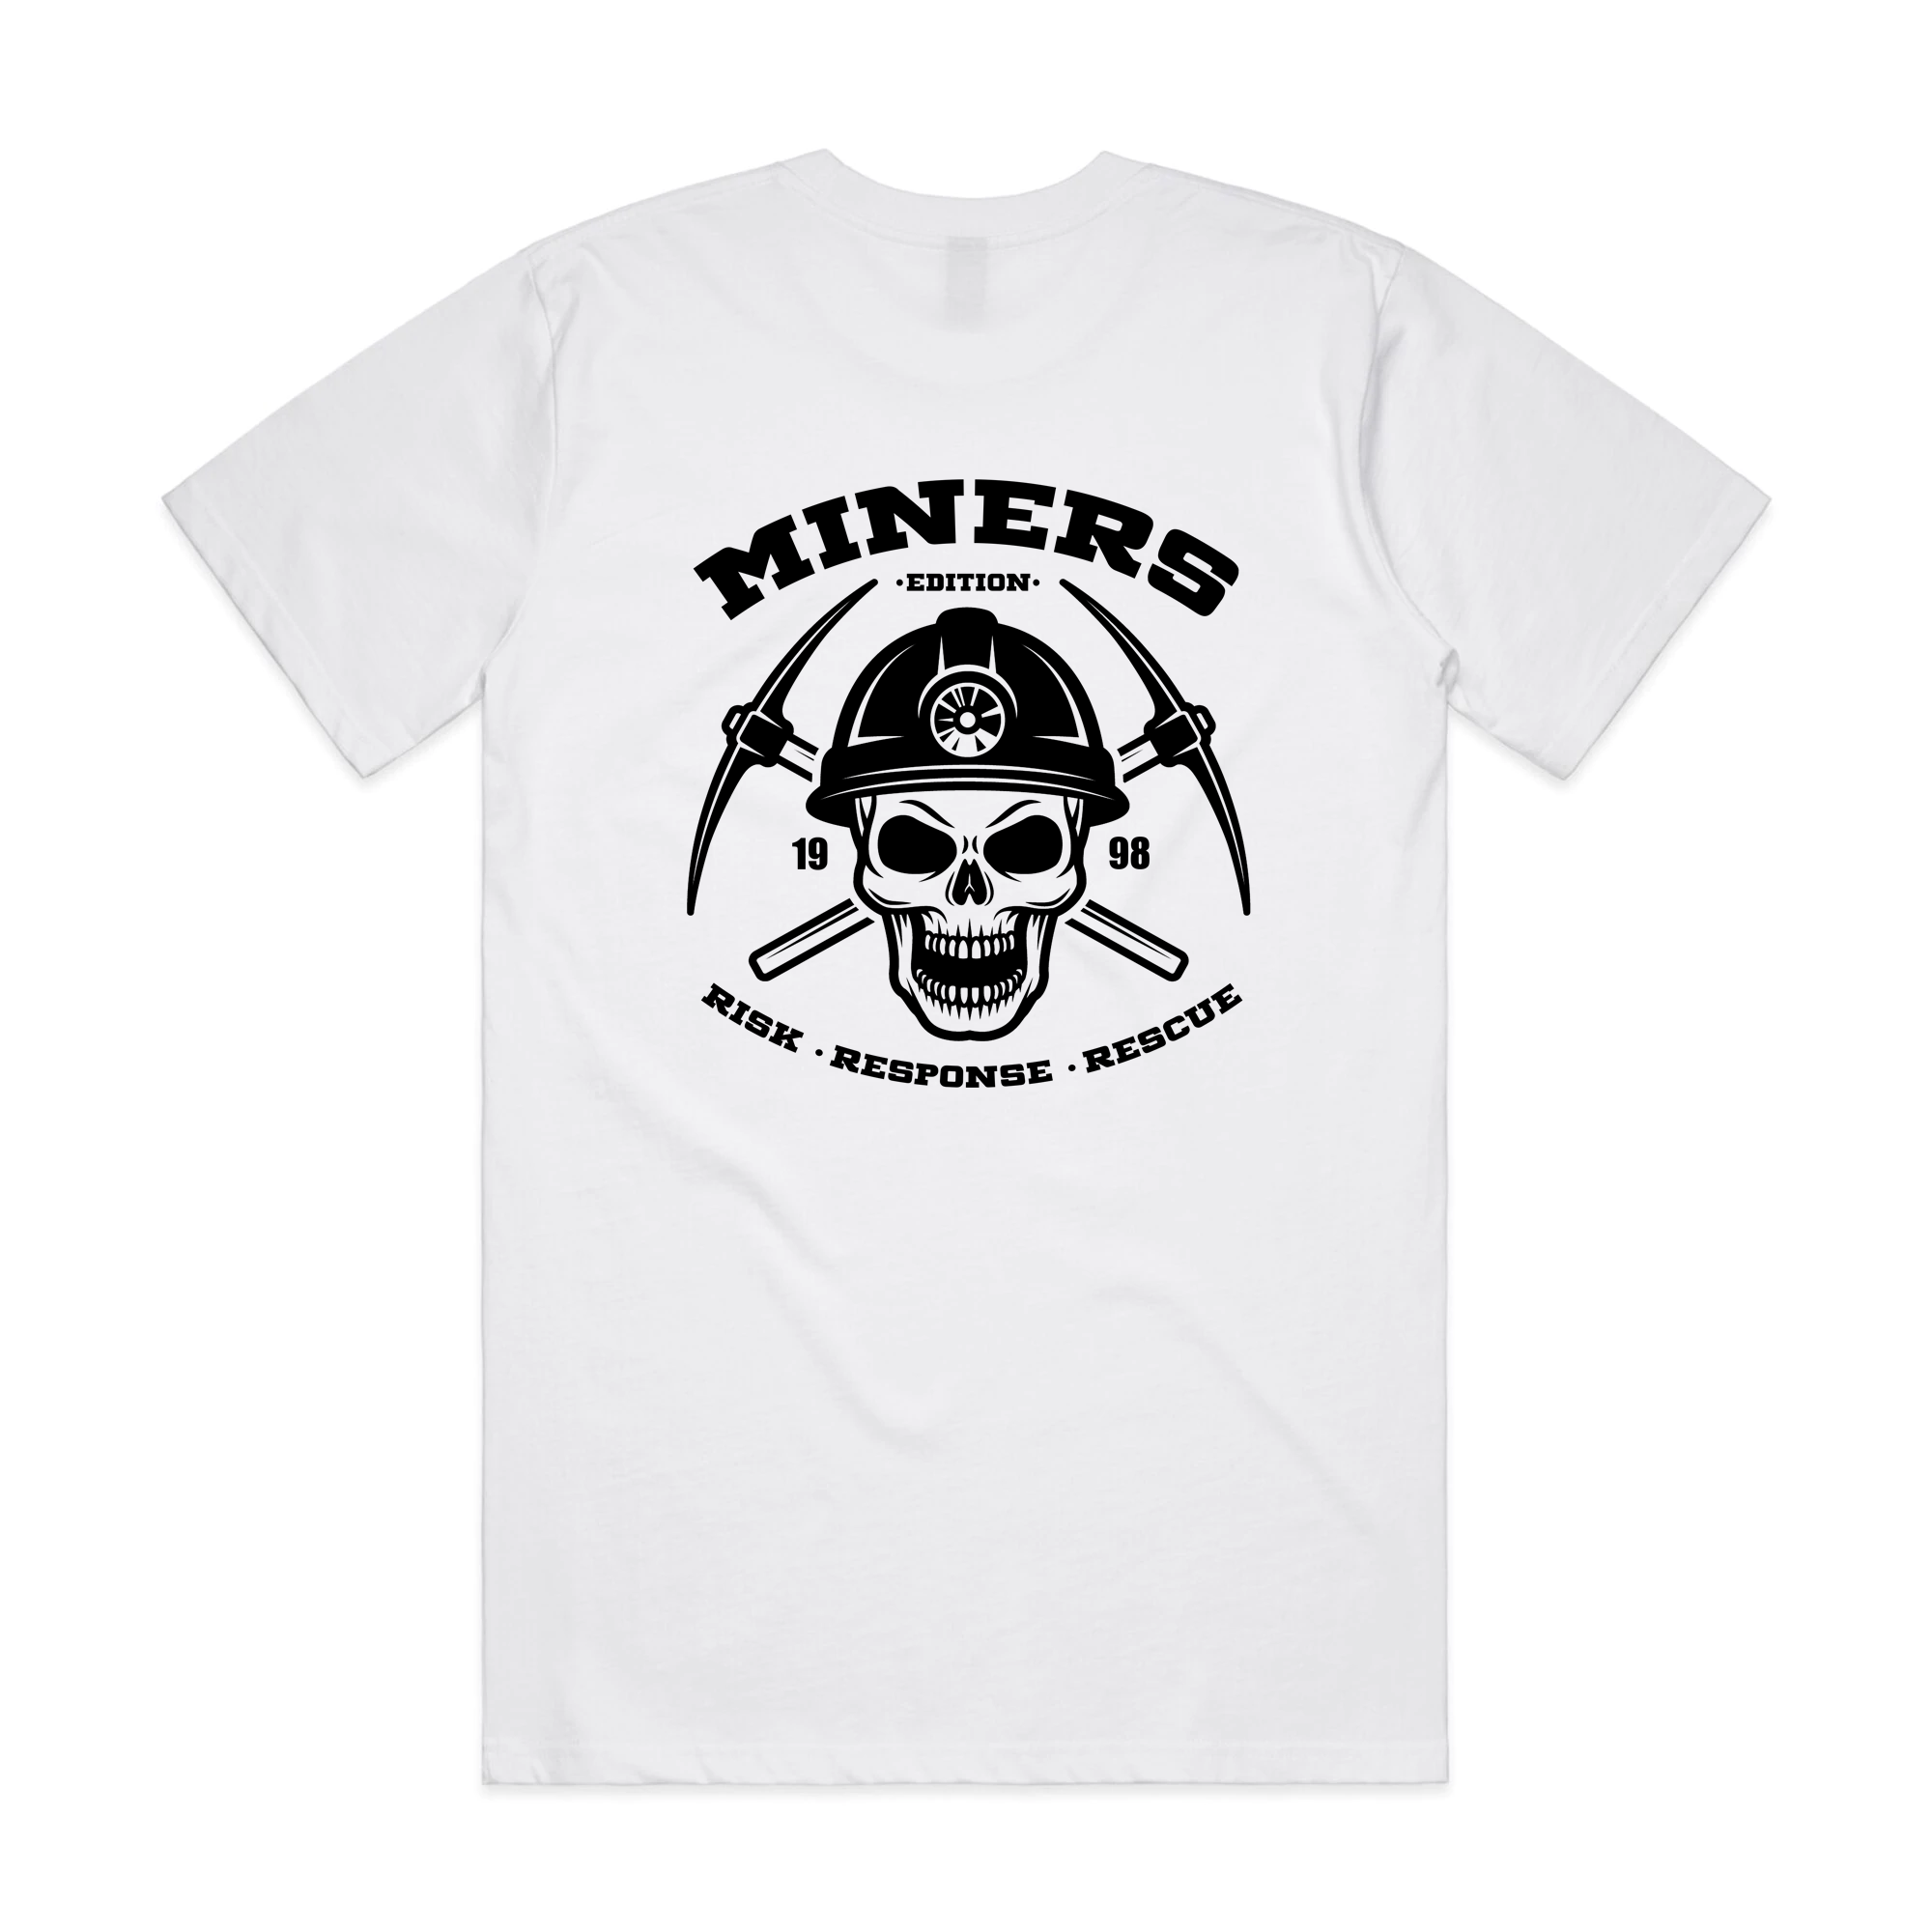 MINERS EDITION T-SHIRT DESCRIPTION: GRAPHIC SCREEN PRINTED FRONT & BACK.• Relaxed Fit• Crew Neck• Heavy Weight, 220 GSM, 22-singles• 100% Combed Cotton• Preshrunk to minimise shrinkage